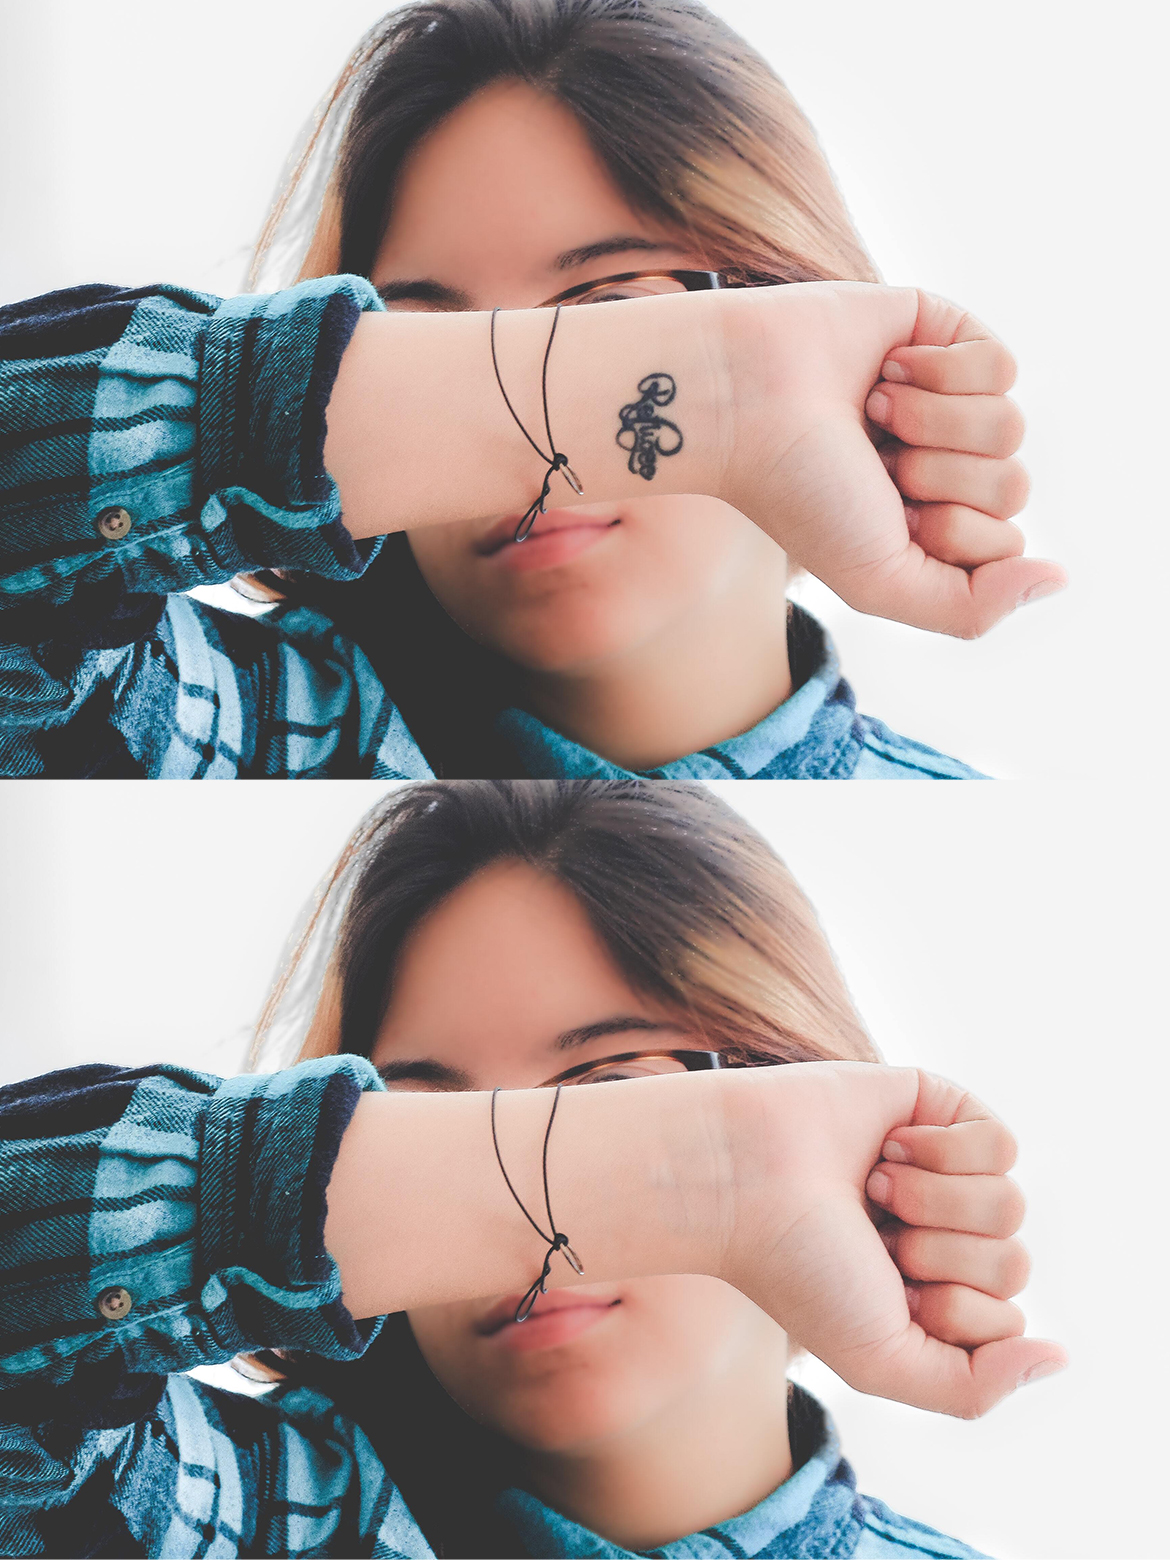 Handy Tips To Hide Your Tattoos With Makeup | SUGAR Cosmetics